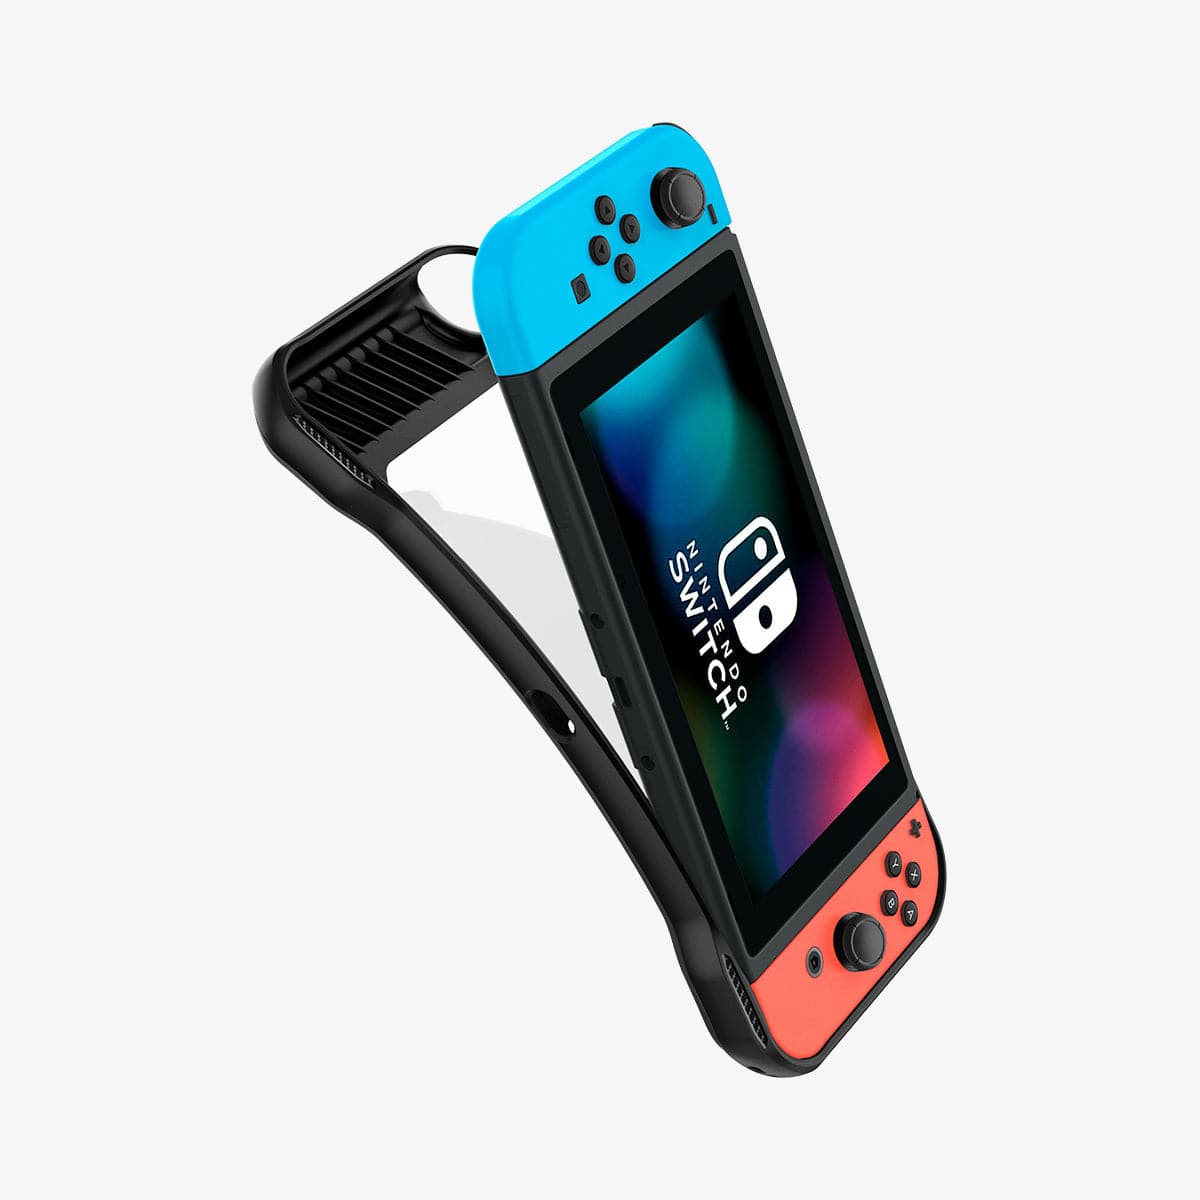 ACS01228 - Nintendo Switch Case Rugged Armor in matte black showing the case bending away from device to show the flexibility